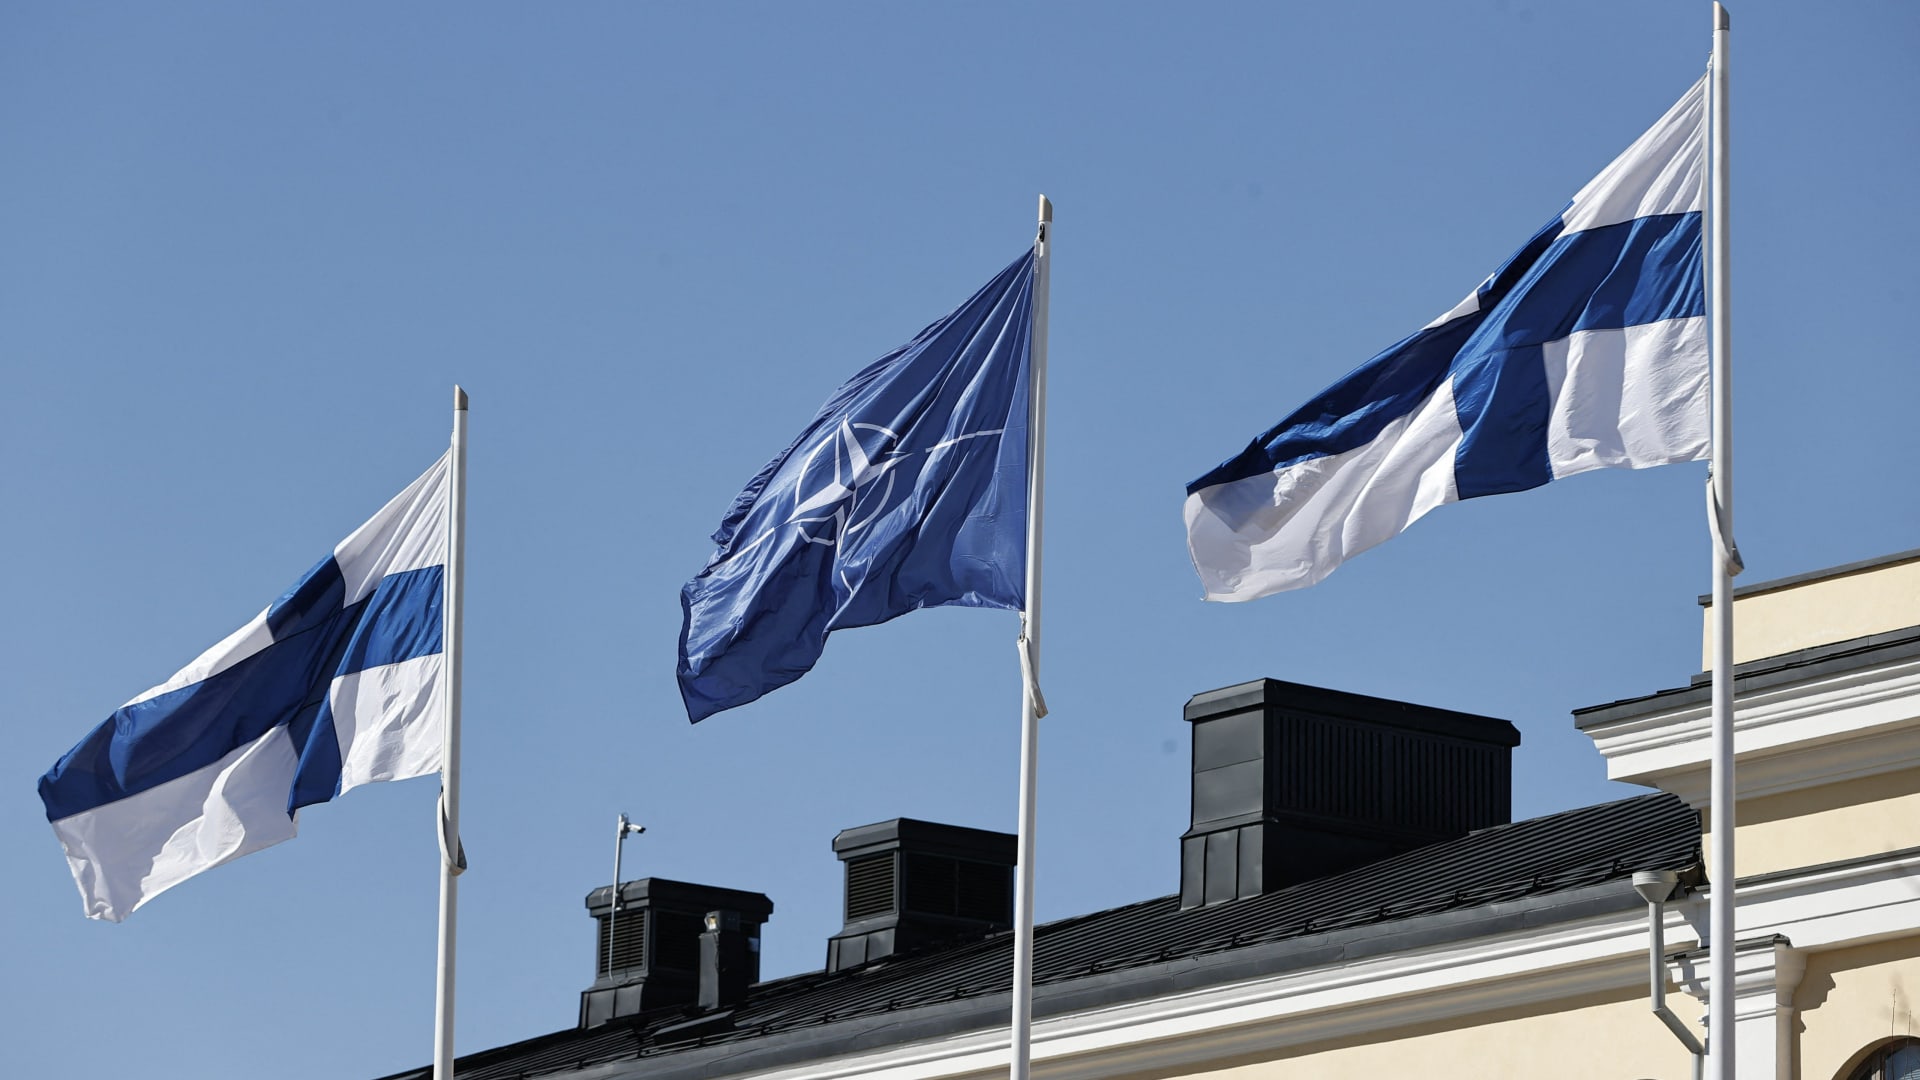 Finnish and Nato flags flutter at the courtyard of the Foreign Ministry in Helsinki, Finland, ahead of accession to the North Atlantic Treaty Organization (NATO) on April 4, 2023.